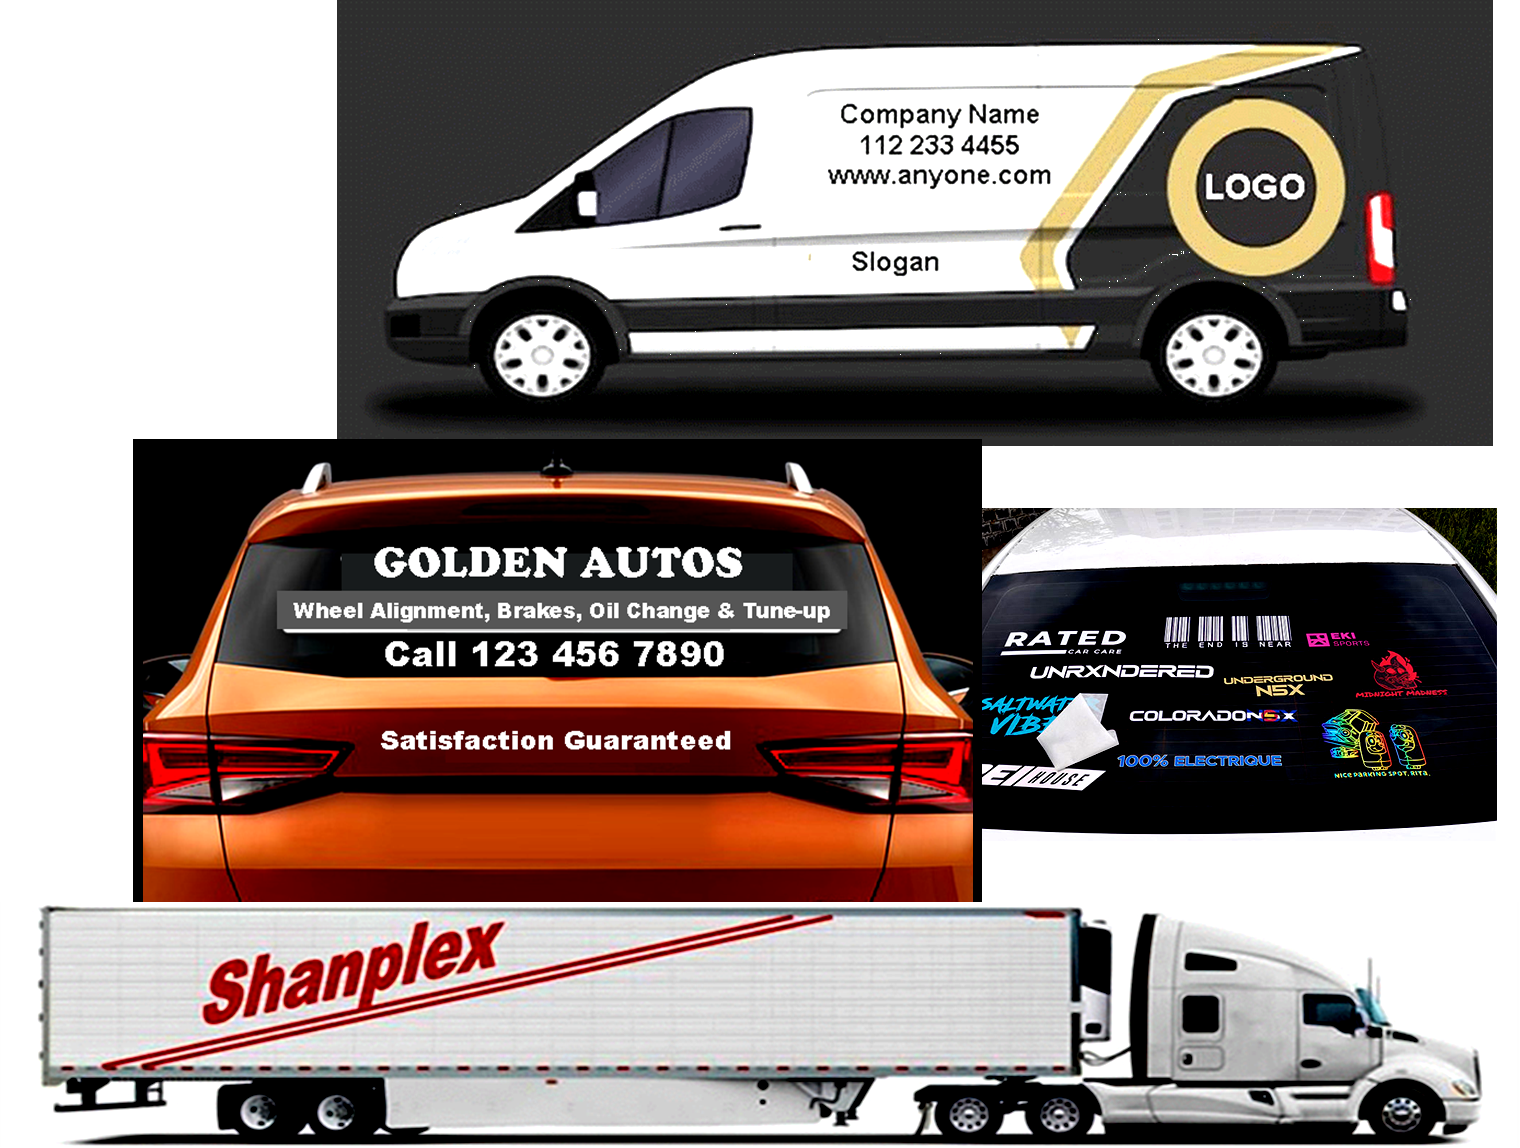 decals, vinyl lettering for cars, vans, trucks, glass windows and dry walls